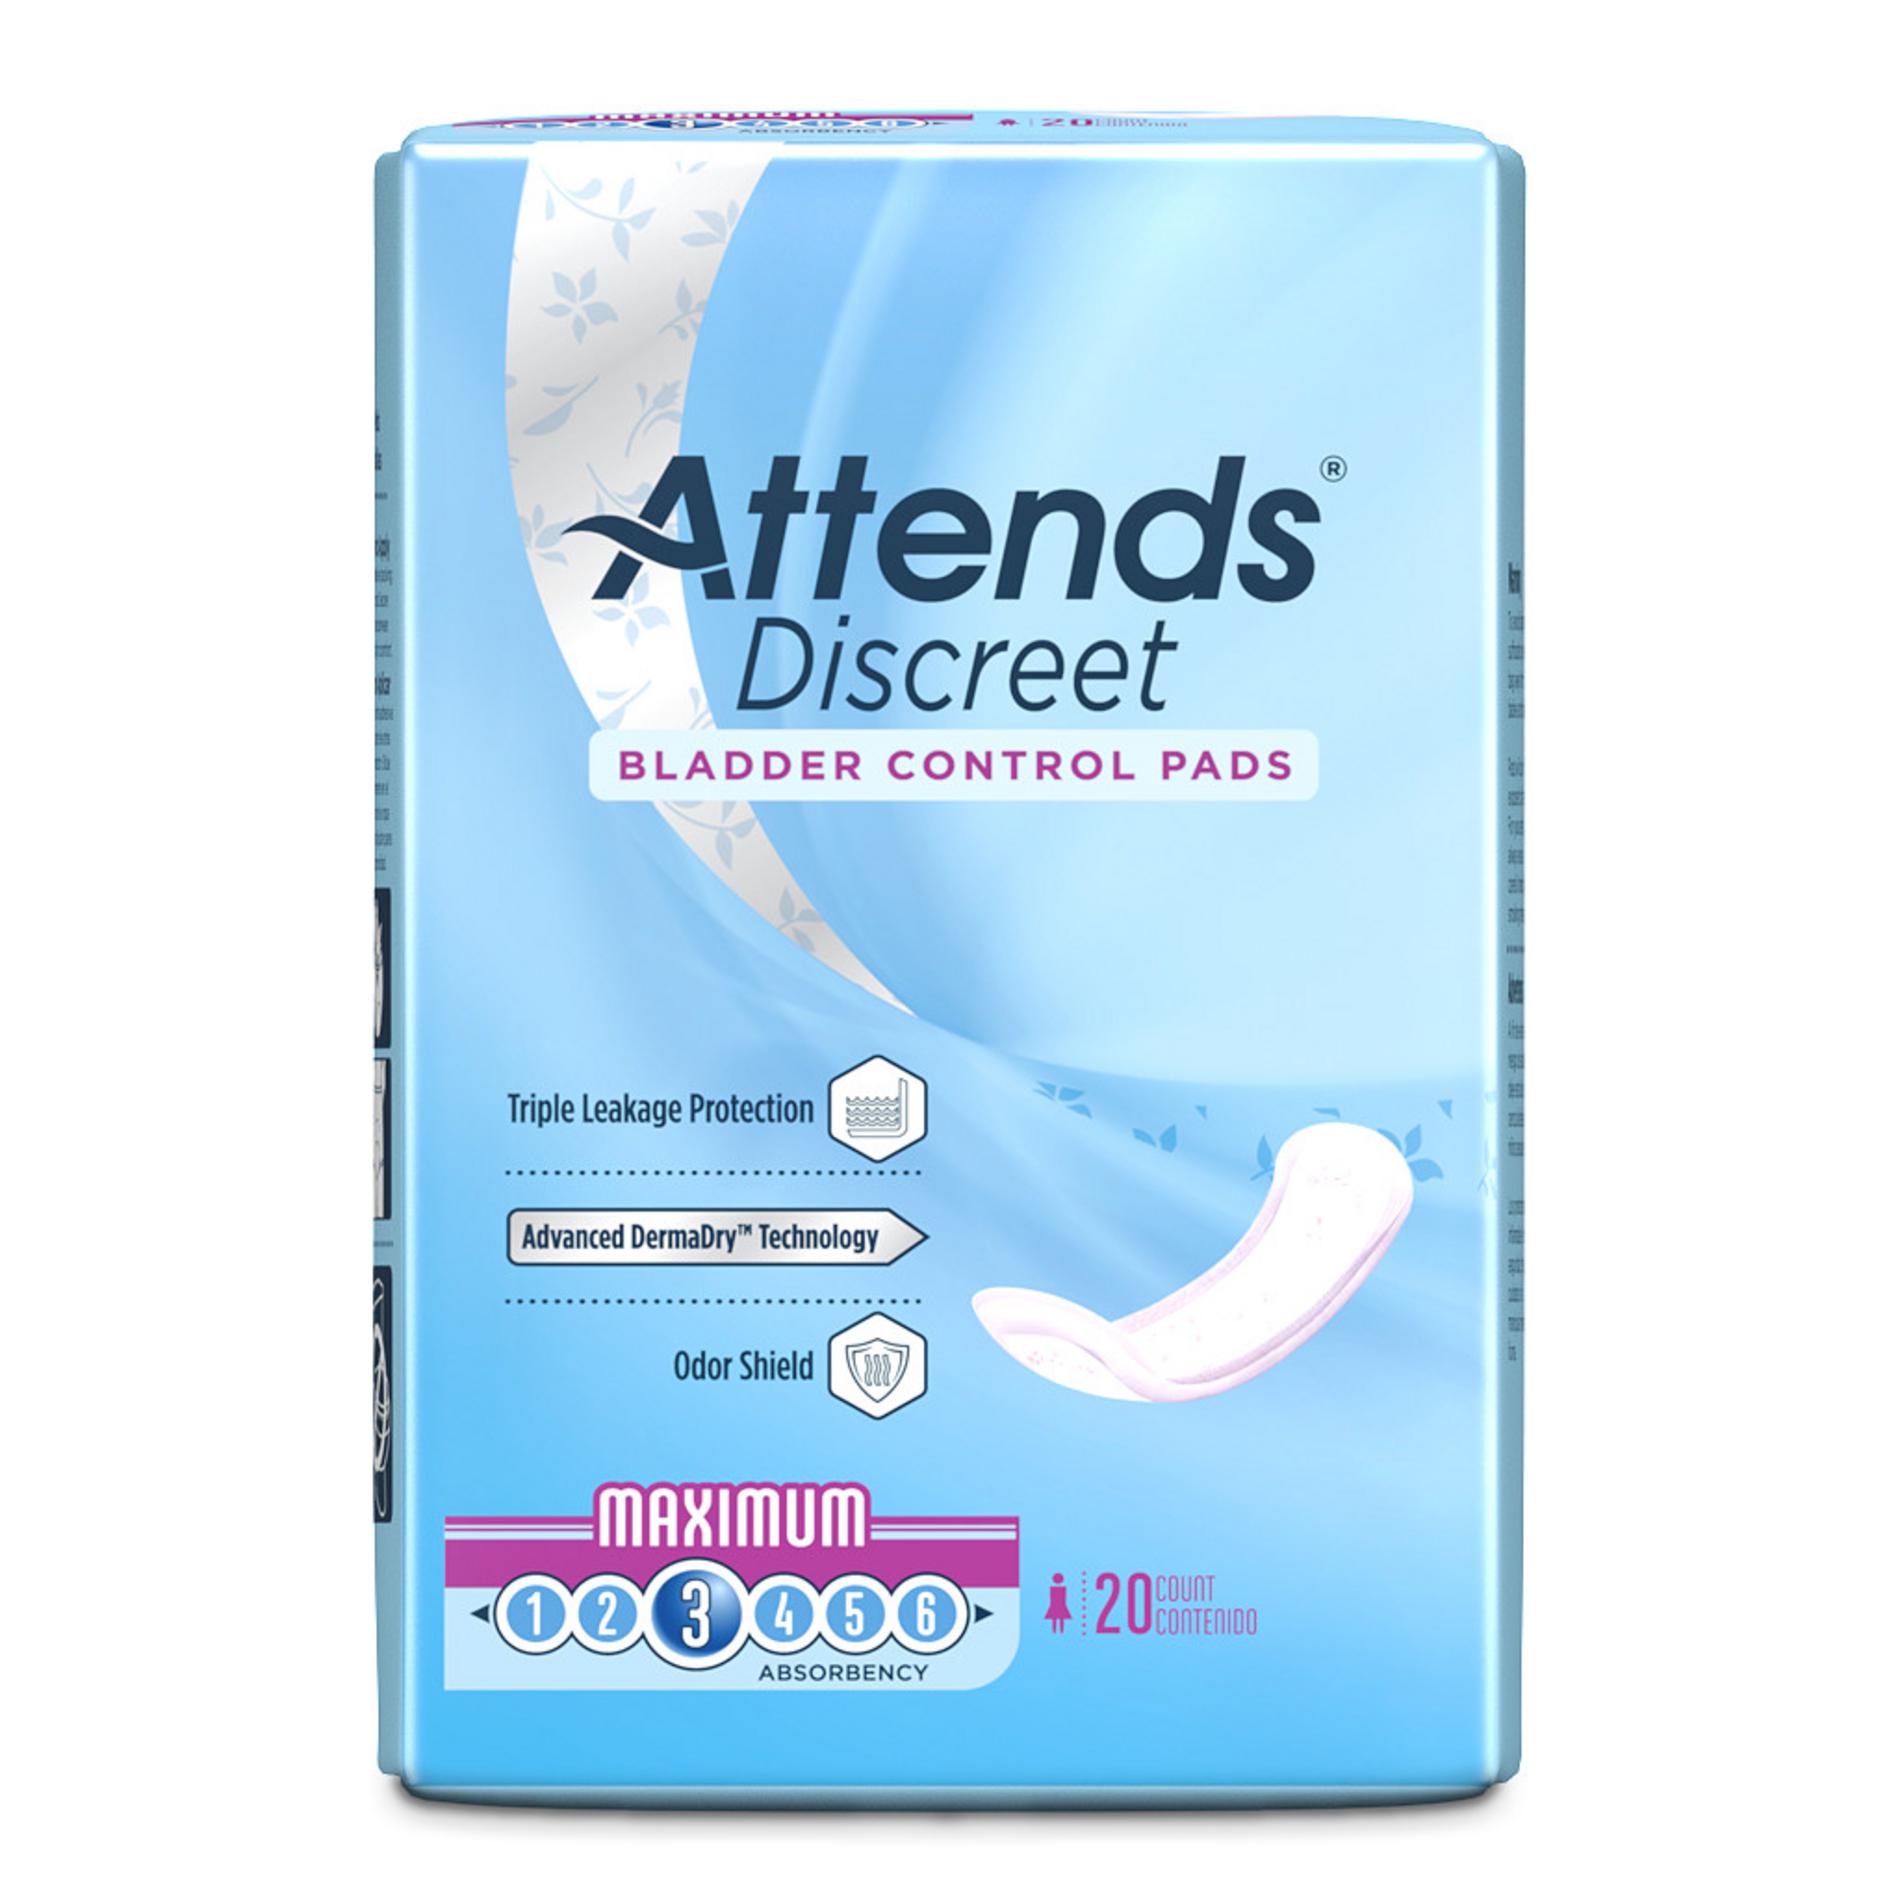 Attends Discreet Bladder Control Pads, 20 Count